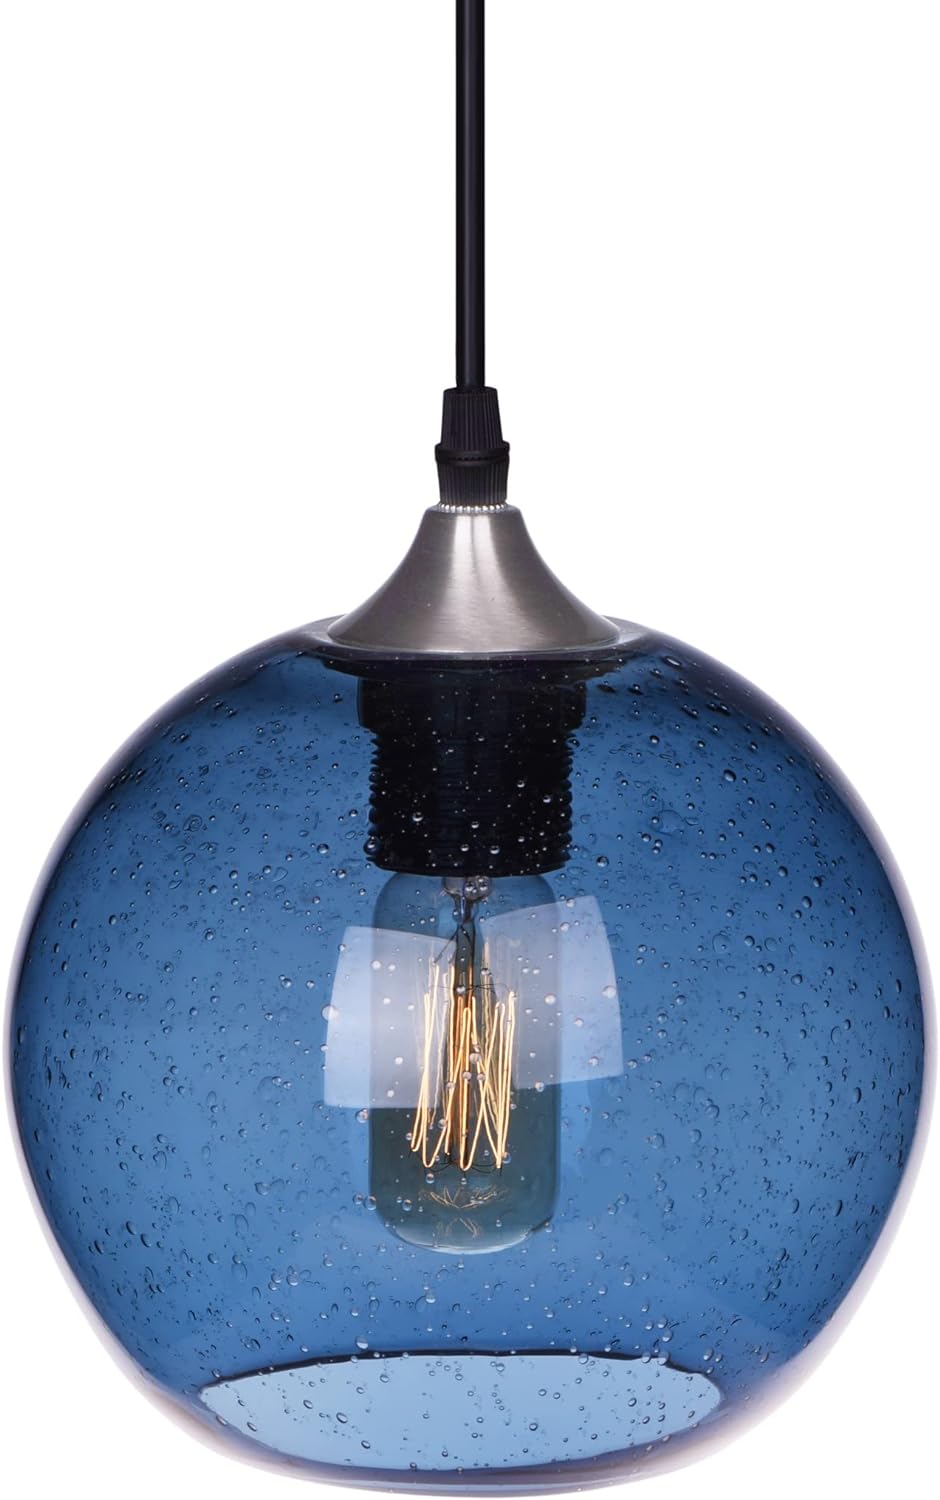 ARIAMOTION Pendant Lights Kitchen Island Hand Blown Glass Modern Light Fixtures Ceiling Hanging Blue Globe Seeded Bubbles Brushed Nickel 7